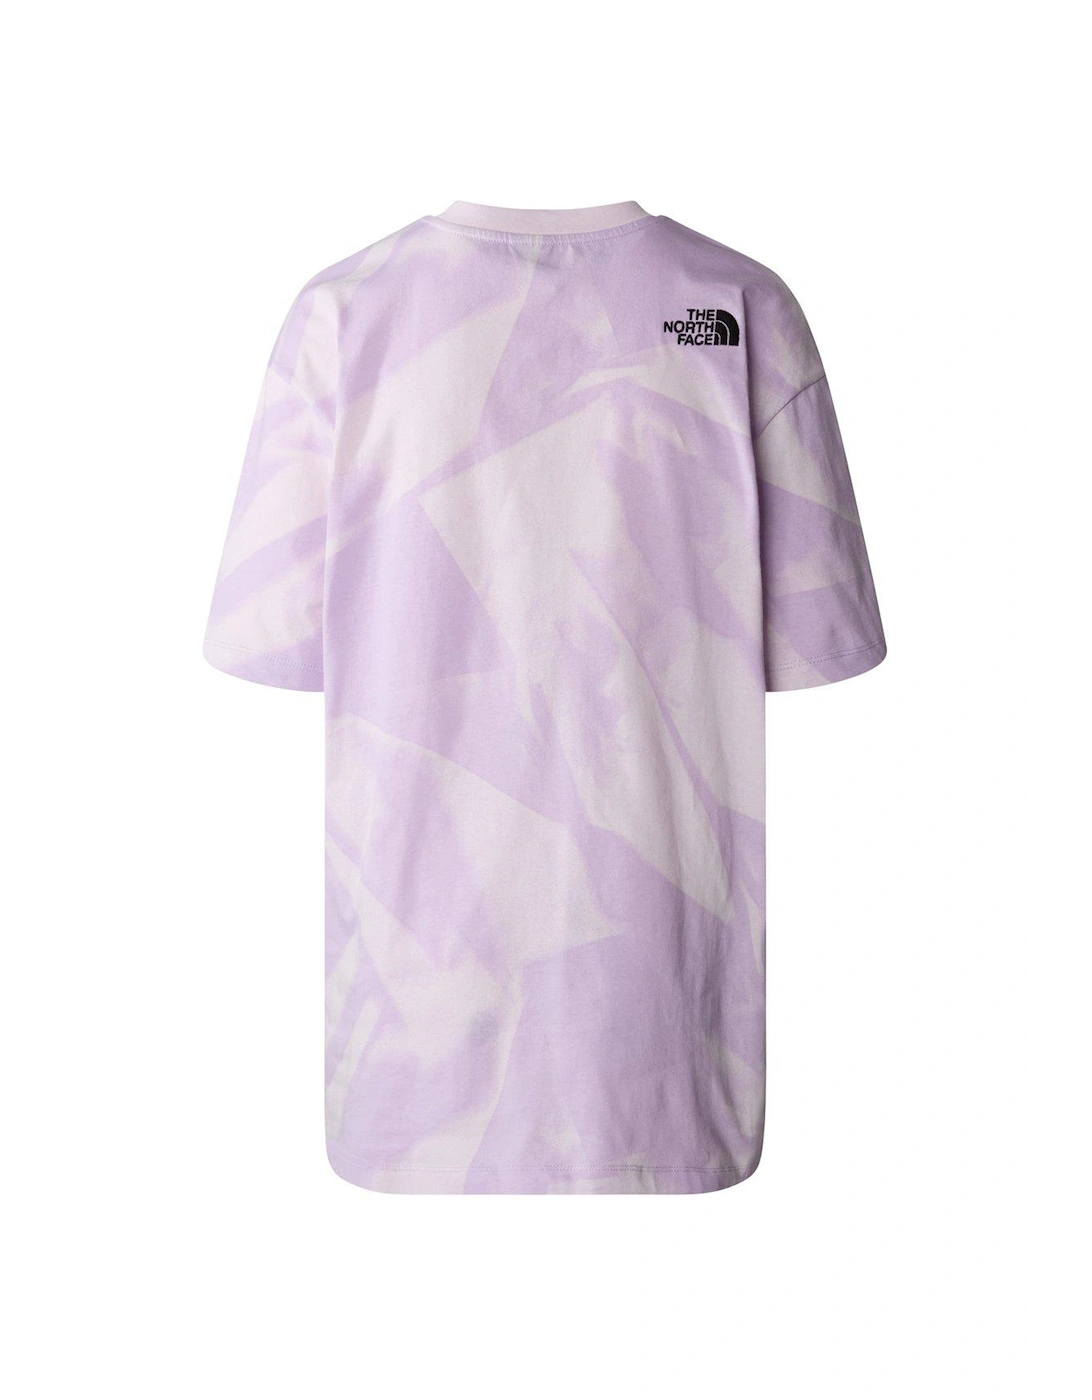 Womens Short Sleeve Oversize Simple Dome Tee Print - Lilac